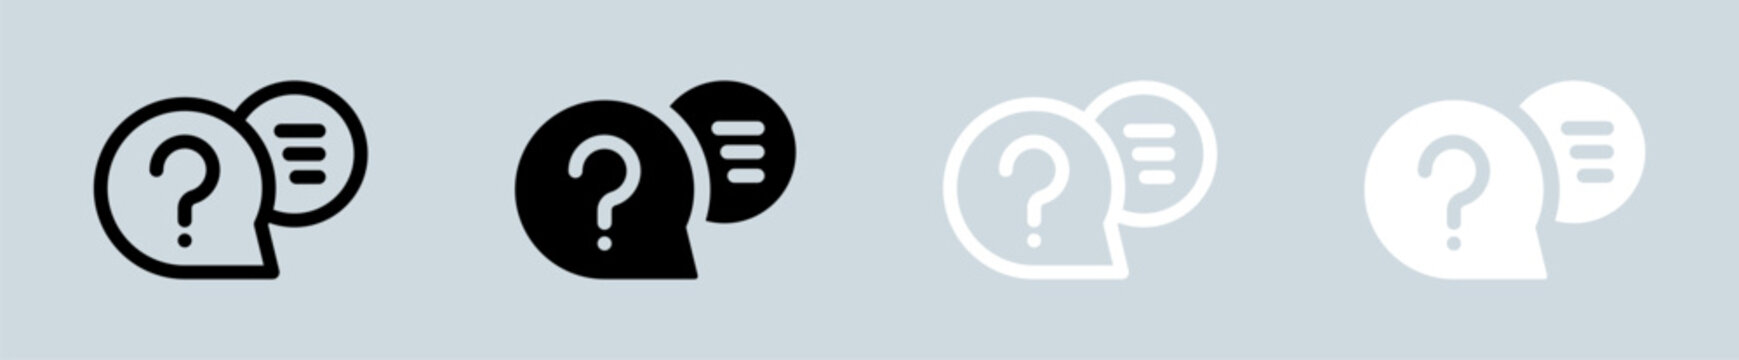 Question icon set in black and white. Help signs vector illustration.